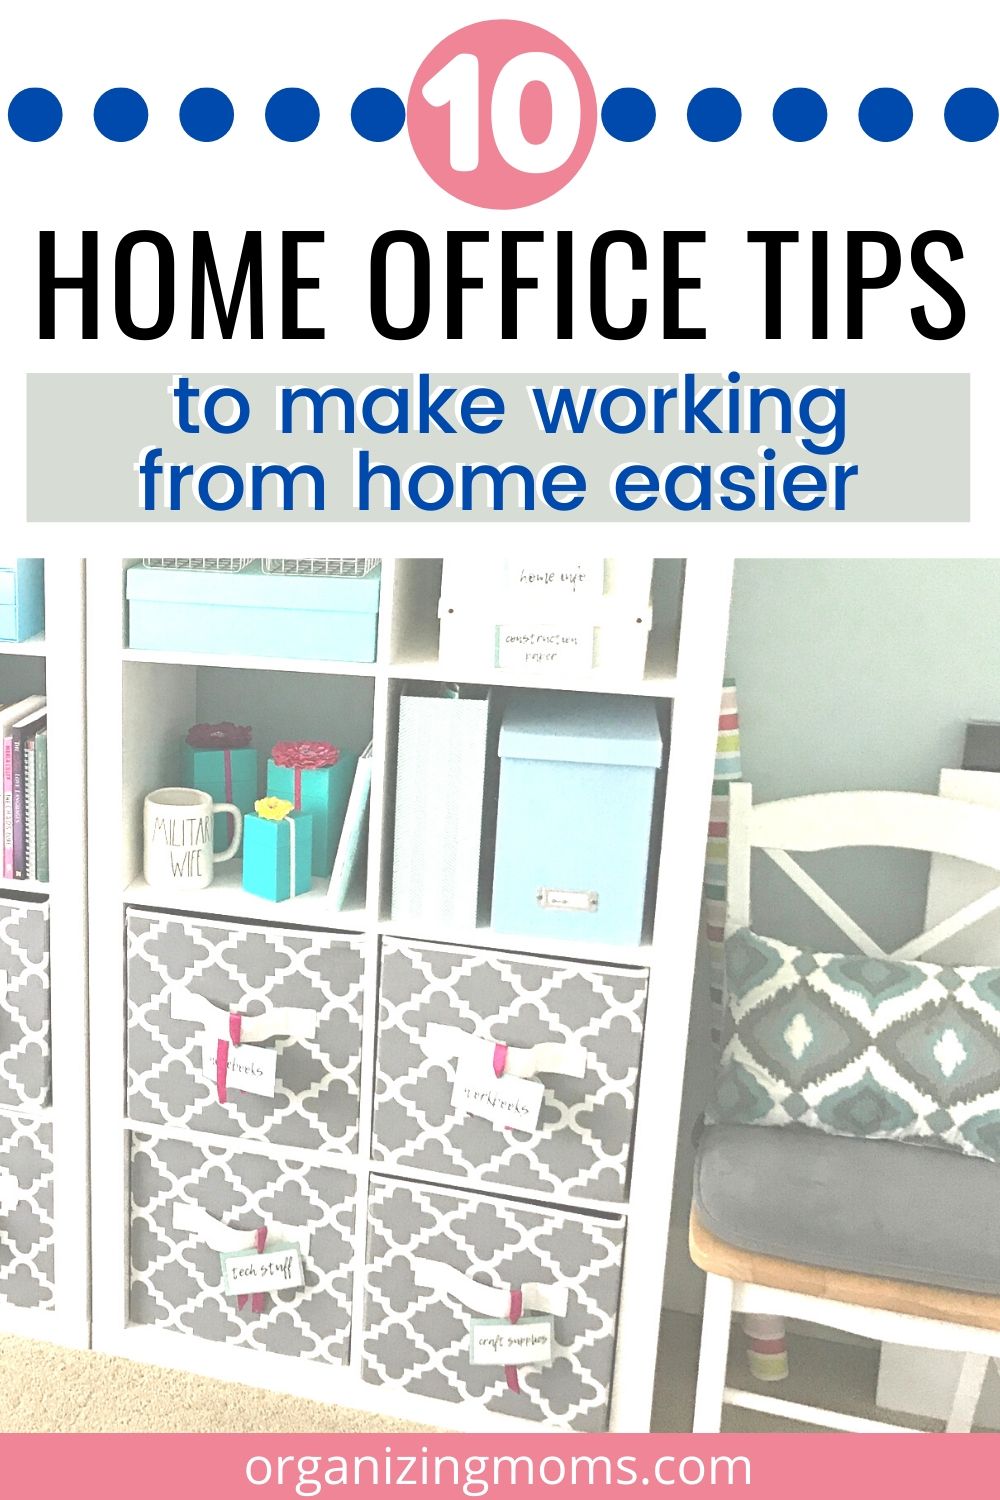 10 Simple Home Office Tips for Your New Workspace - Organizing Moms